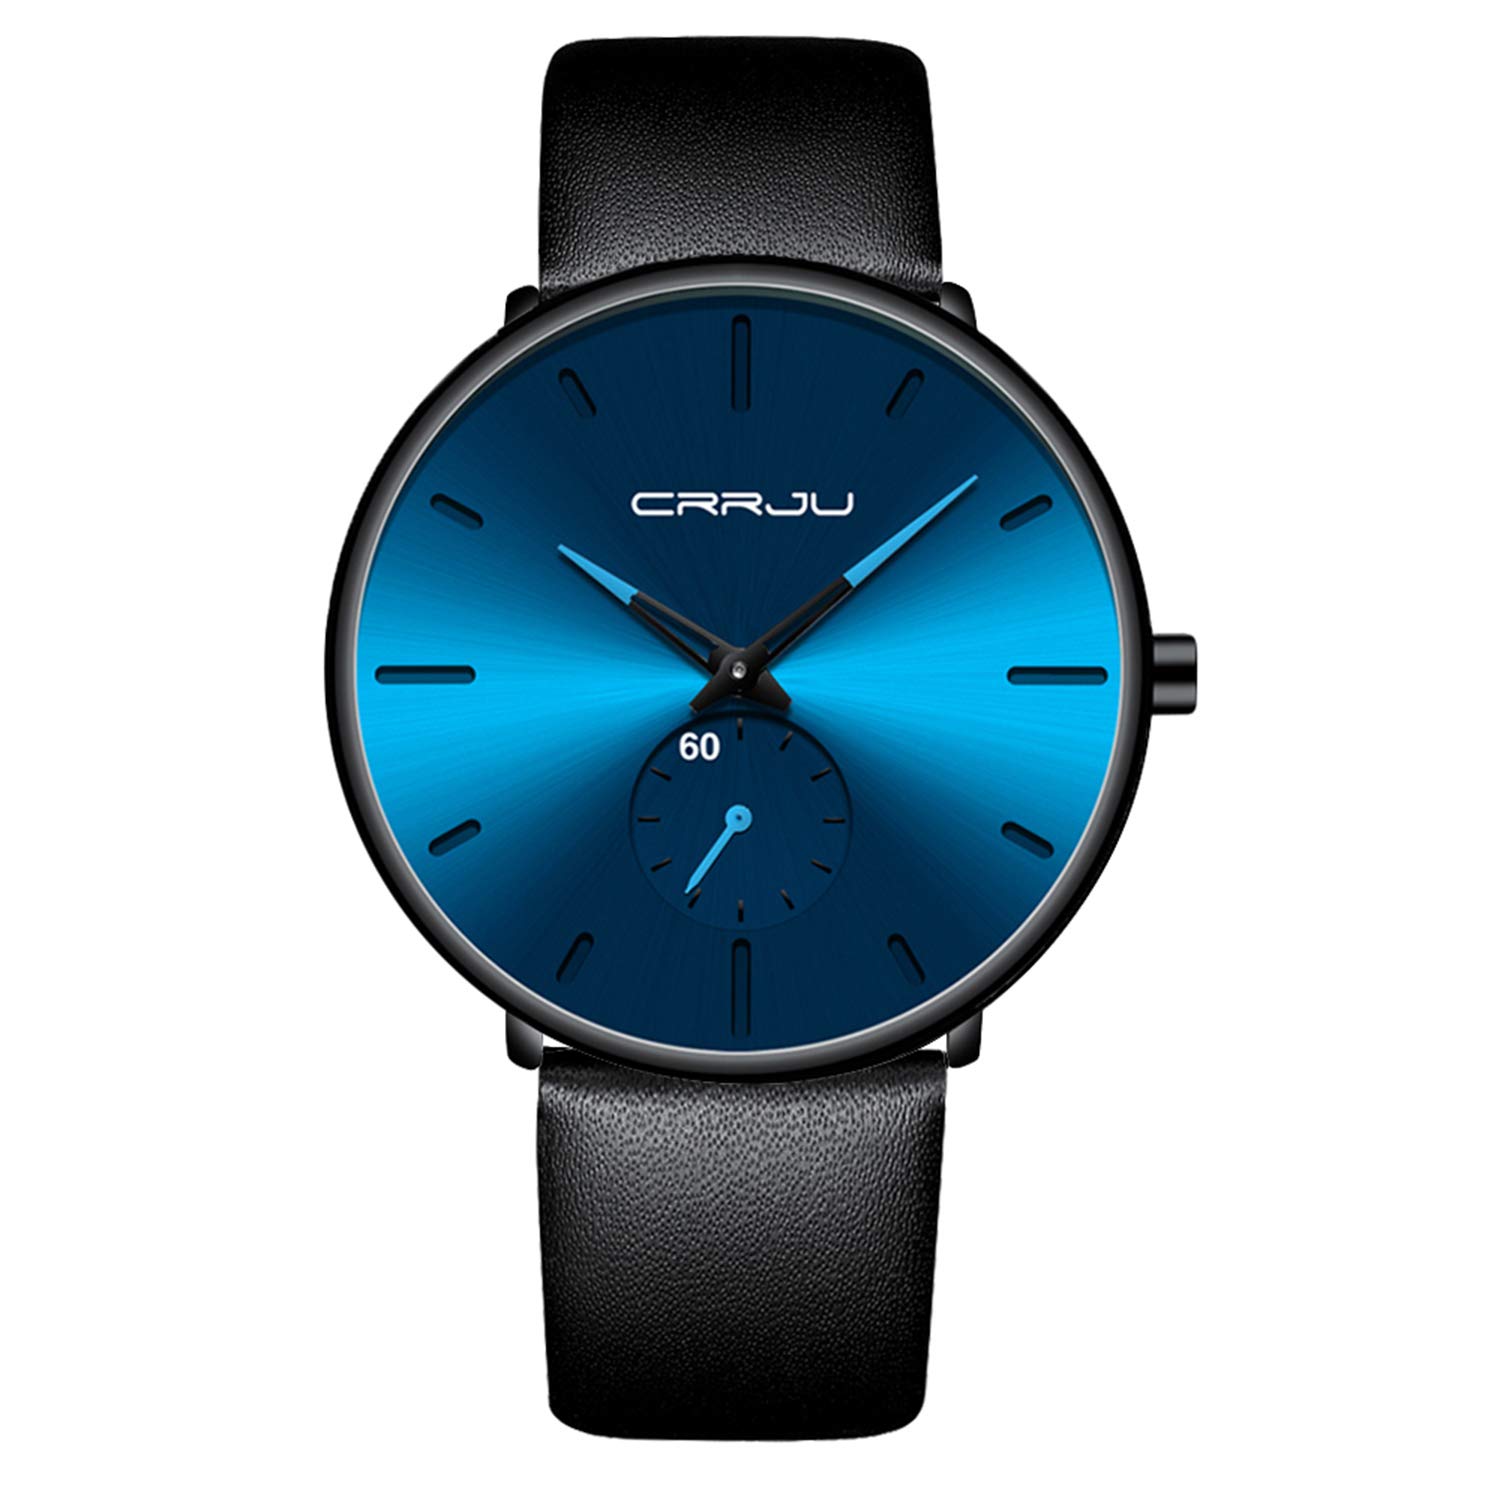 Mens Watches Ultra-Thin Minimalist Waterproof-Fashion Wrist Watch for Men Unisex Dress with Black Leather Band-Blue Hands Blu